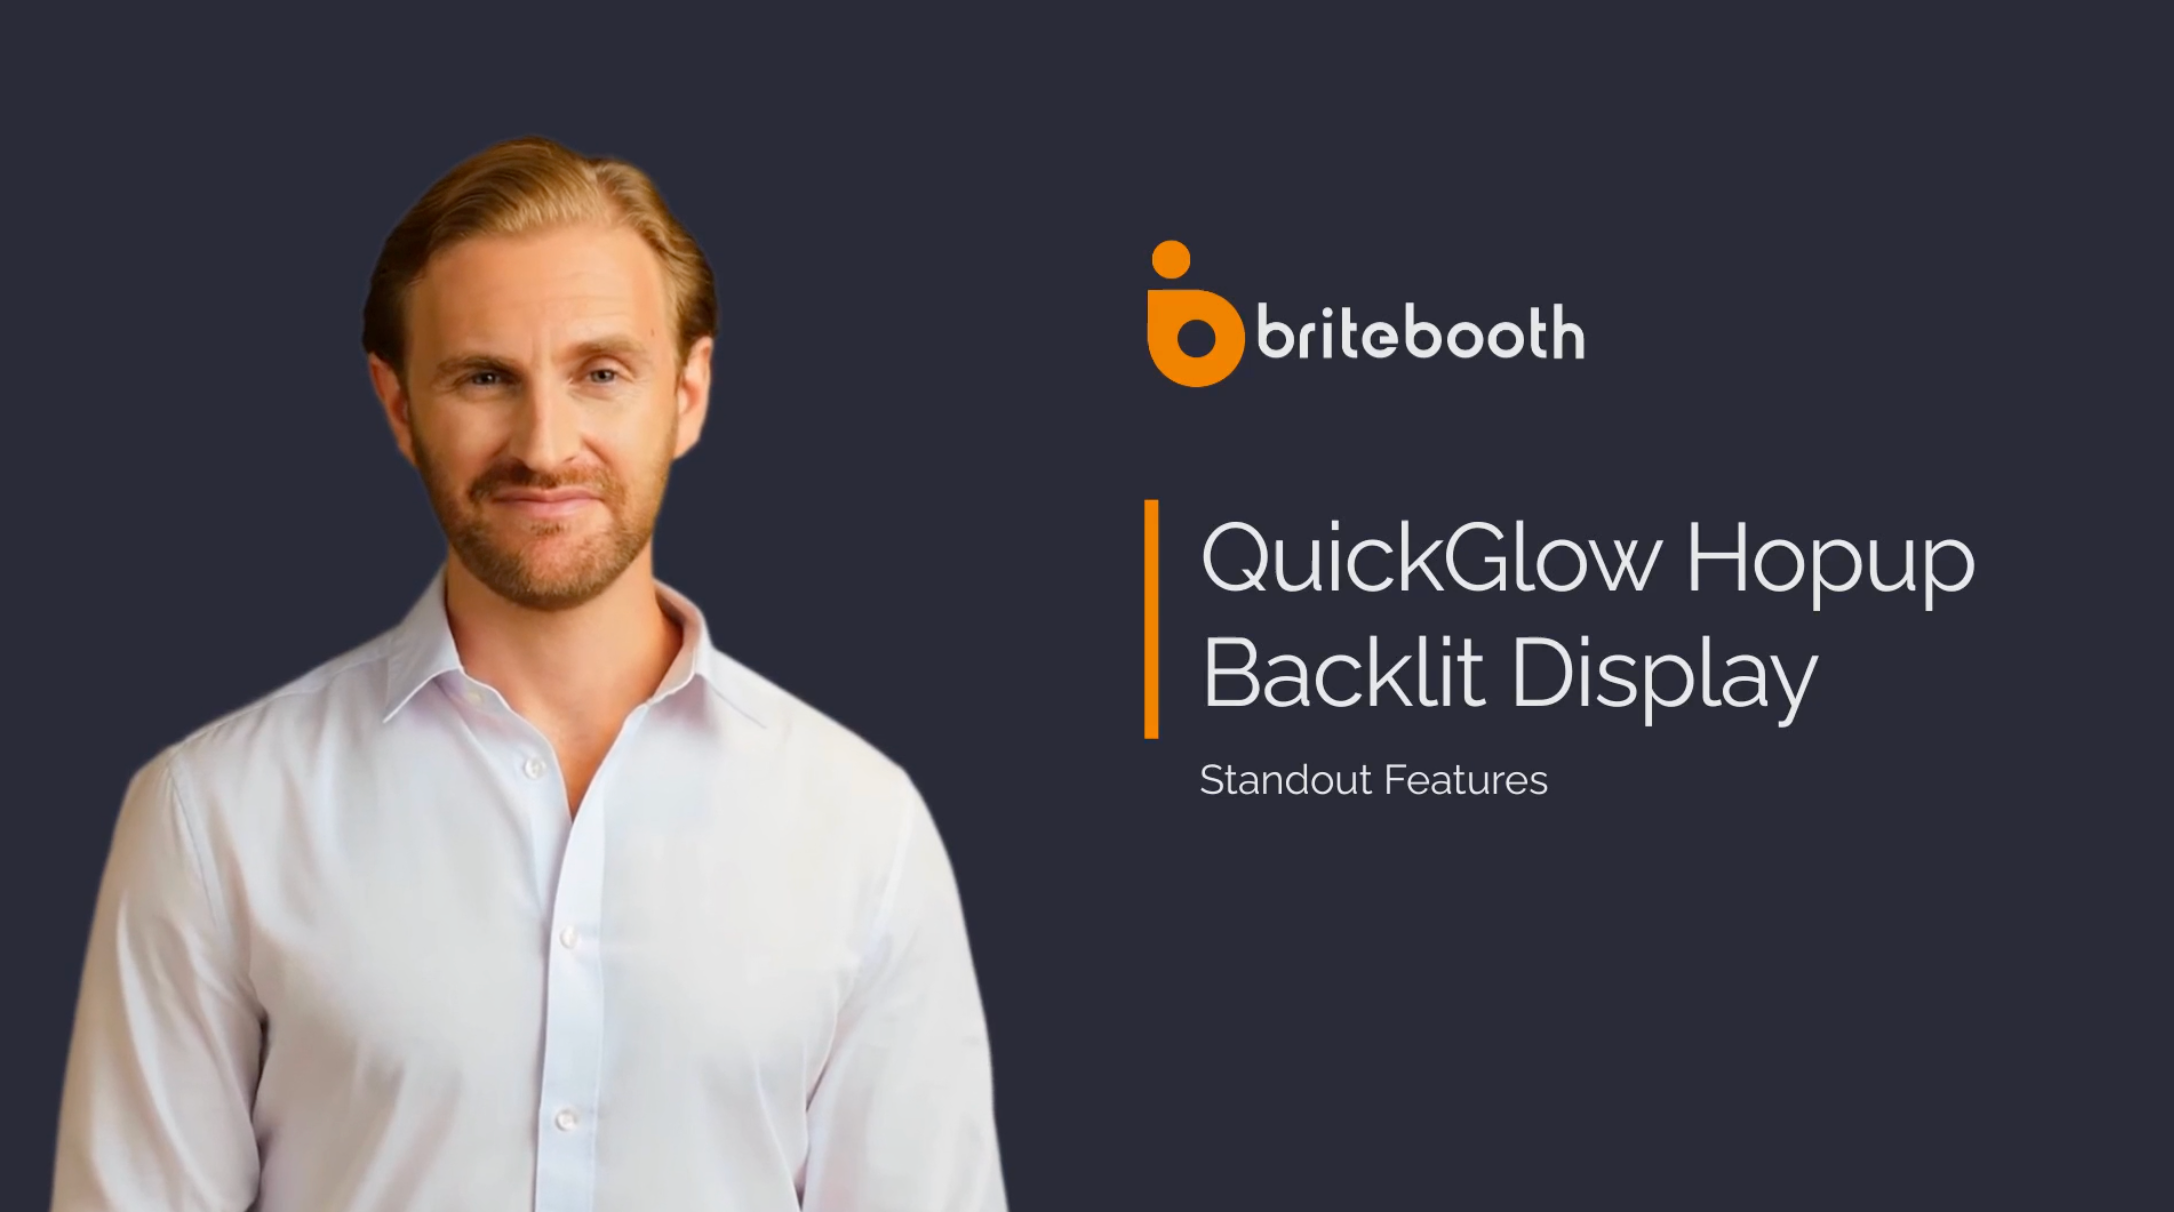 Load video: Features and Benefits of the QuickGlow Hopup Backlit Display